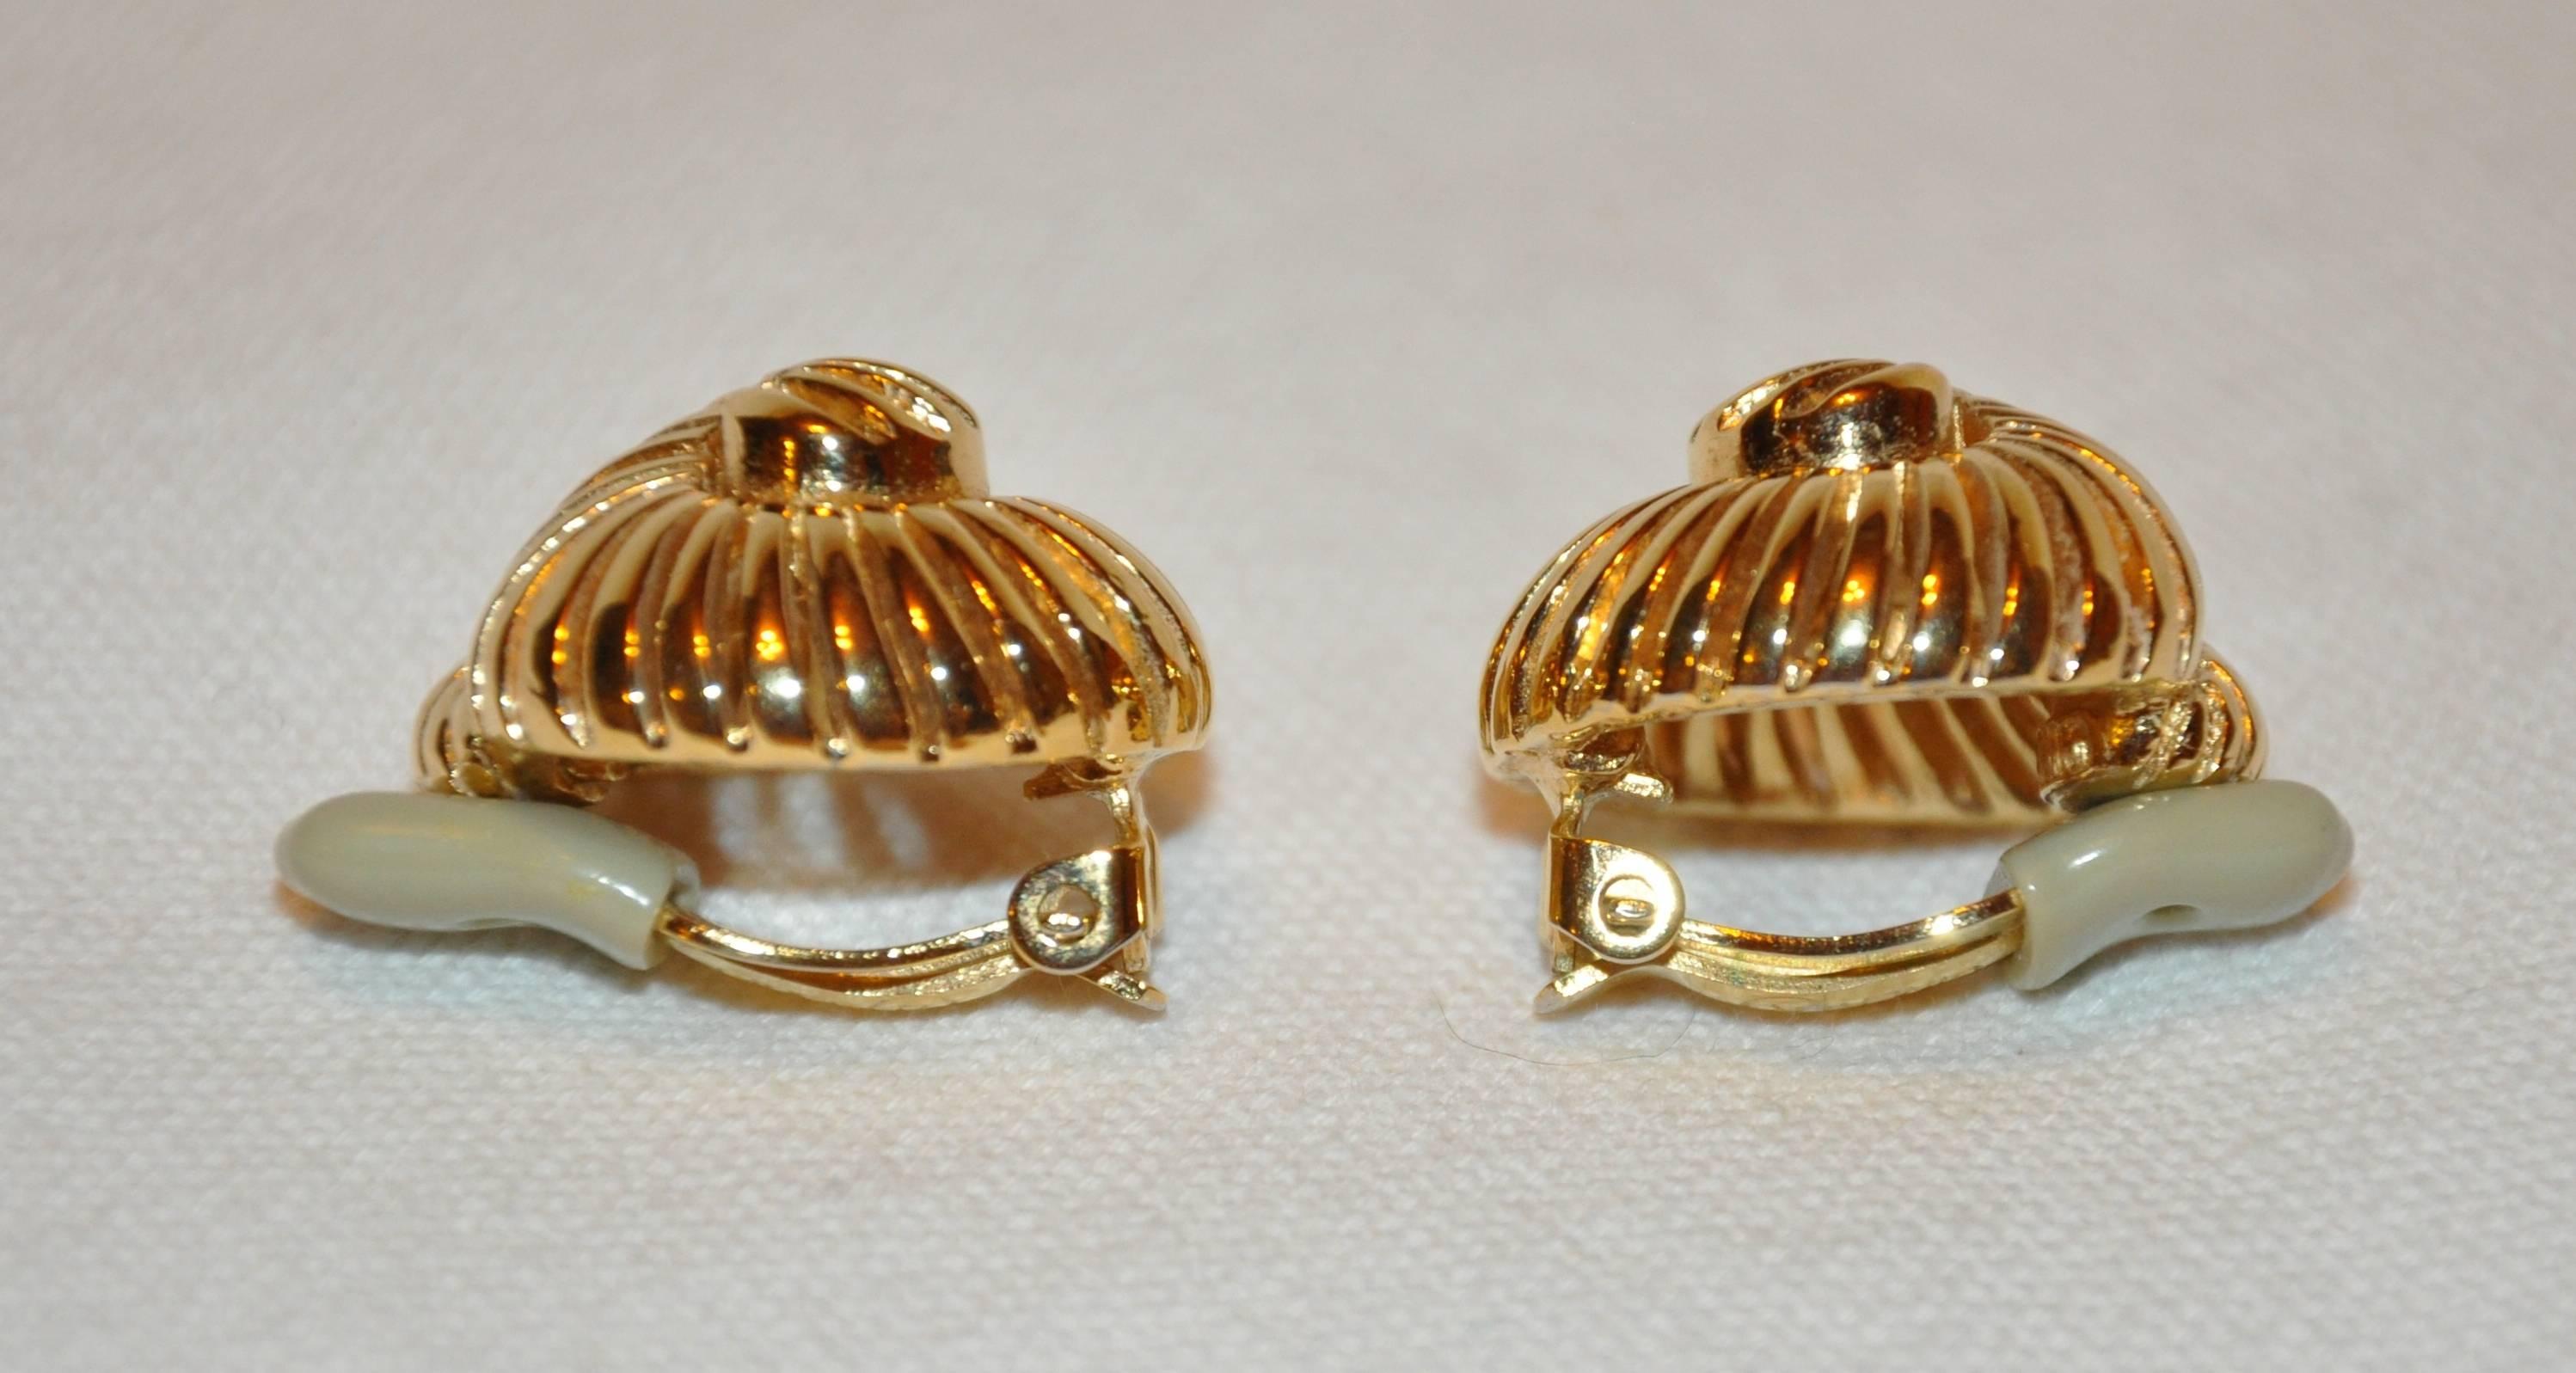        Ciner's wonderful elegant gilded gold vermeil hardware "Seashell" clip-on earrings are timeless and classic. These earrings measures 1" x 1", with a depth of 1/2", made in USA.